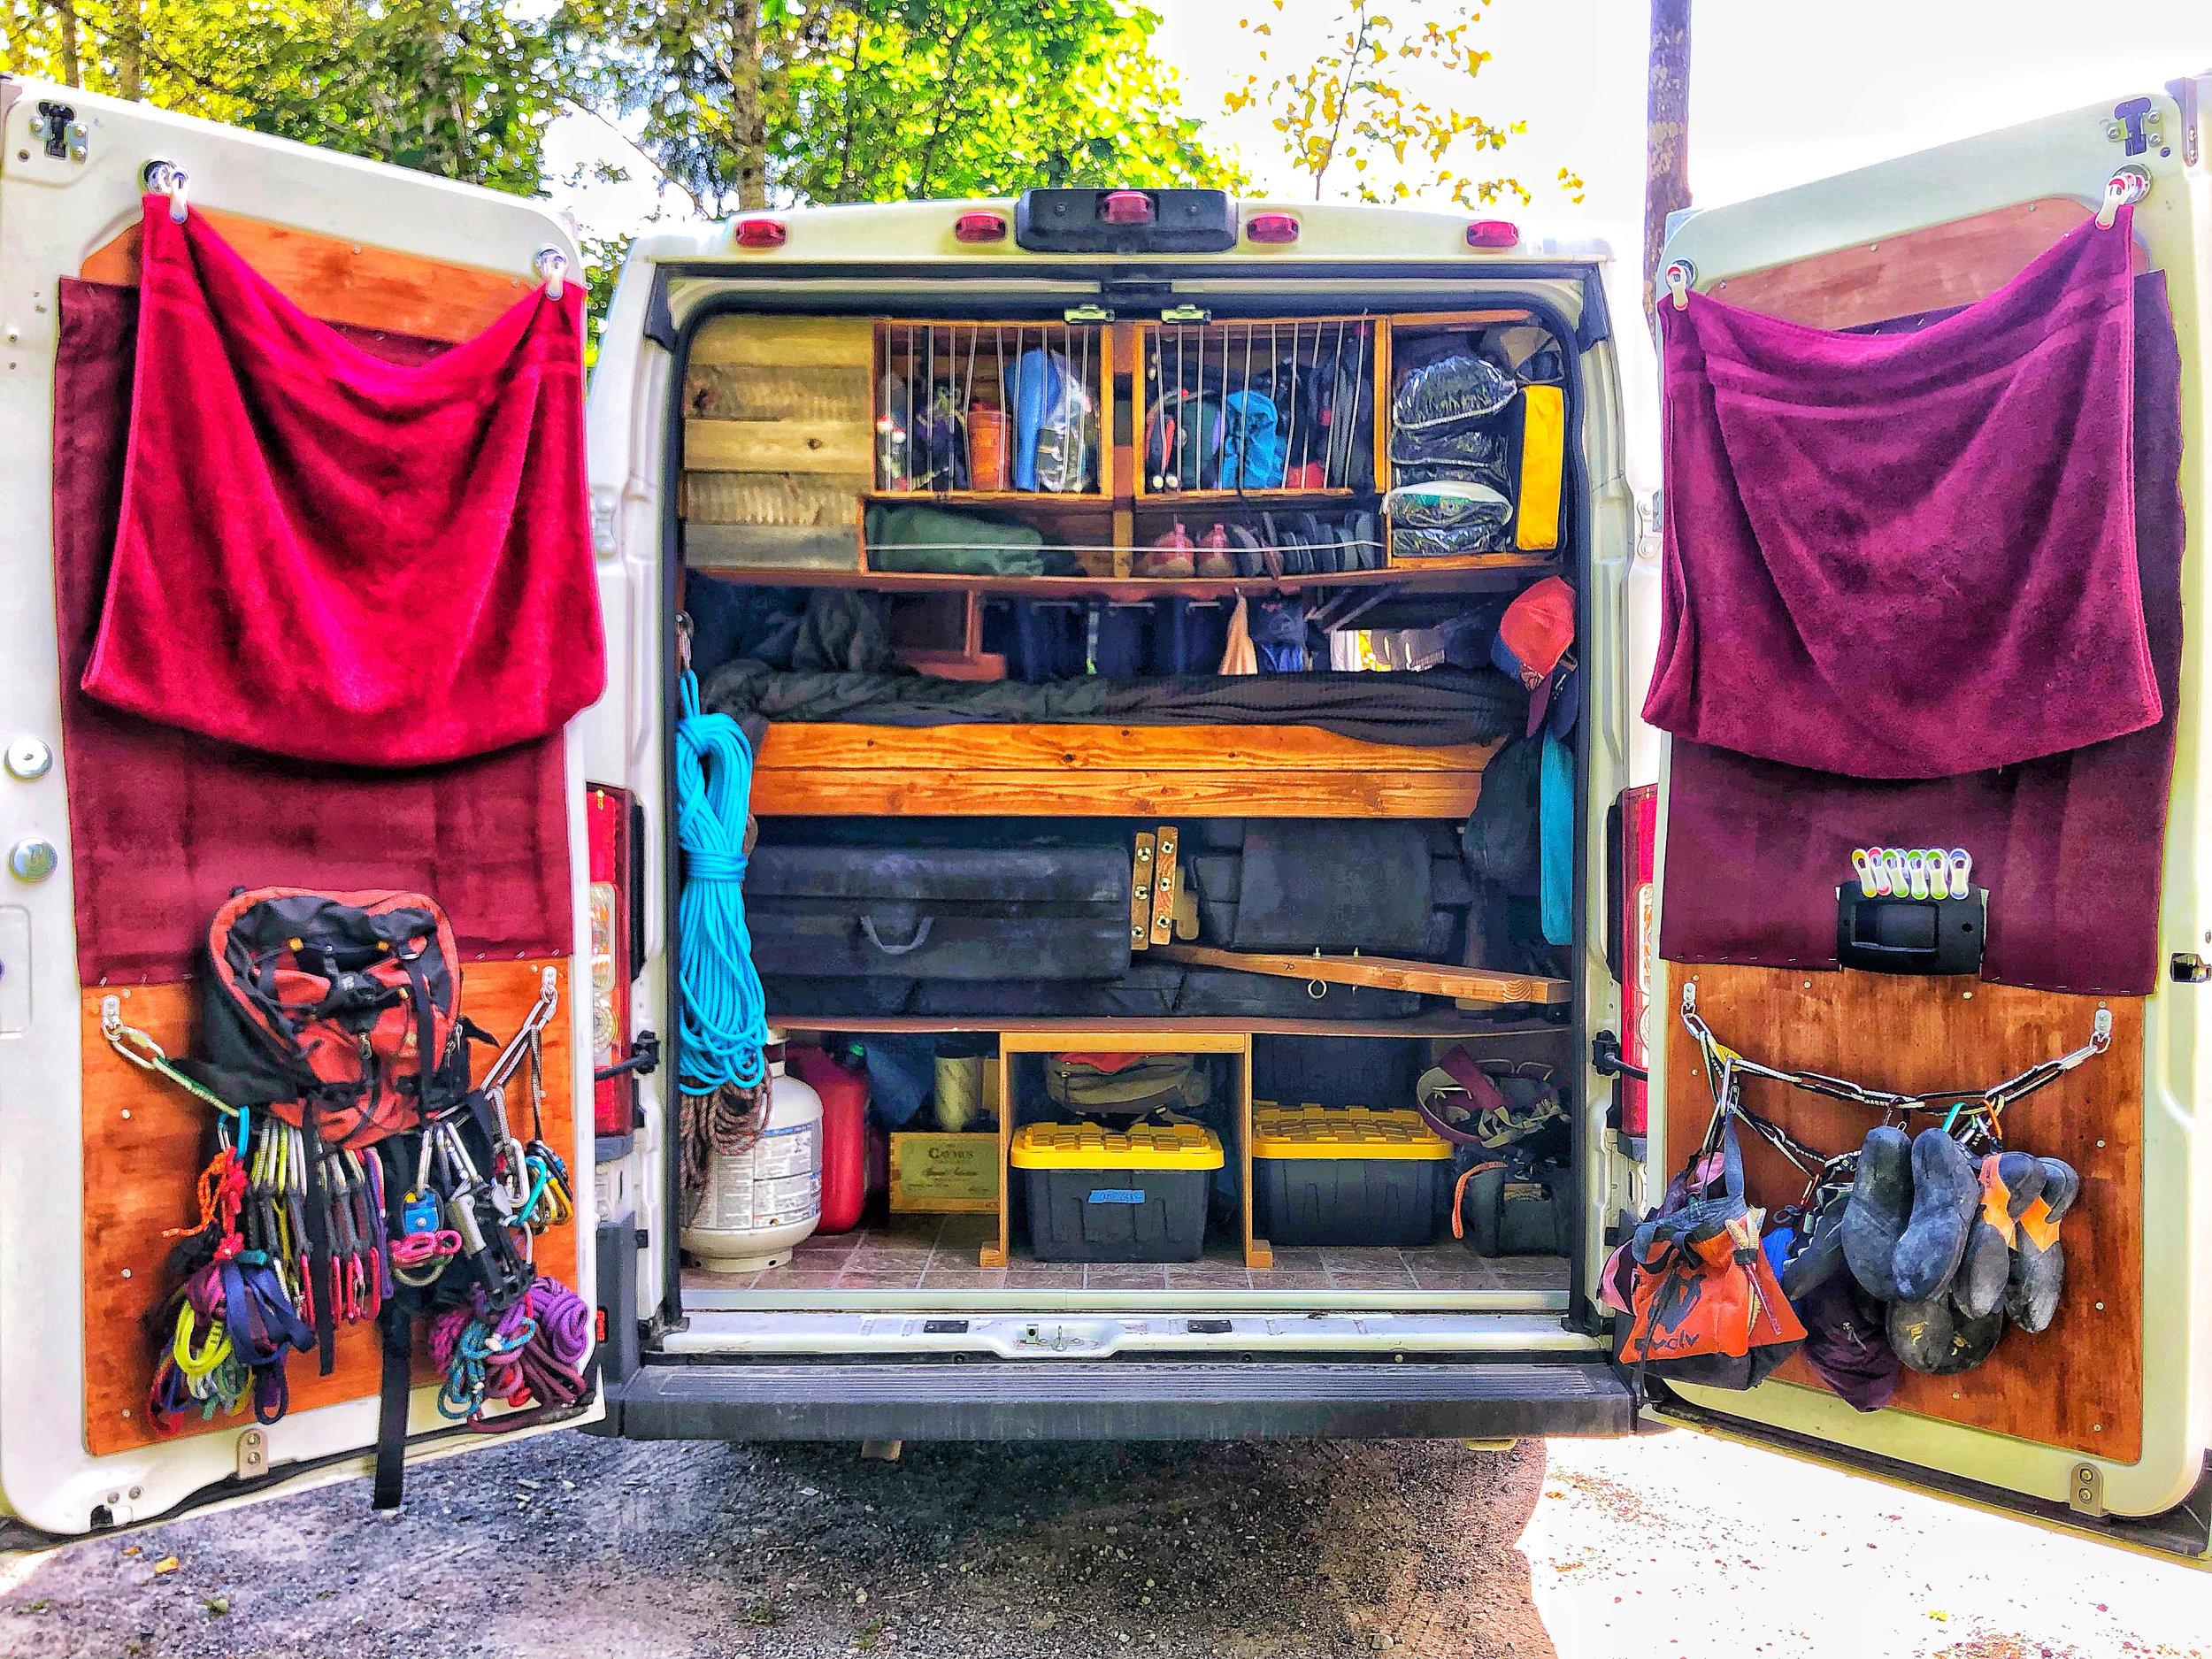  We’ve officially lived in our van for for whole months (whaaaaaattt?!) and we’re now living be on the road full time. This had given us time to really reflect on what van life is actually like.  #alwaystheadventure #vanlife 